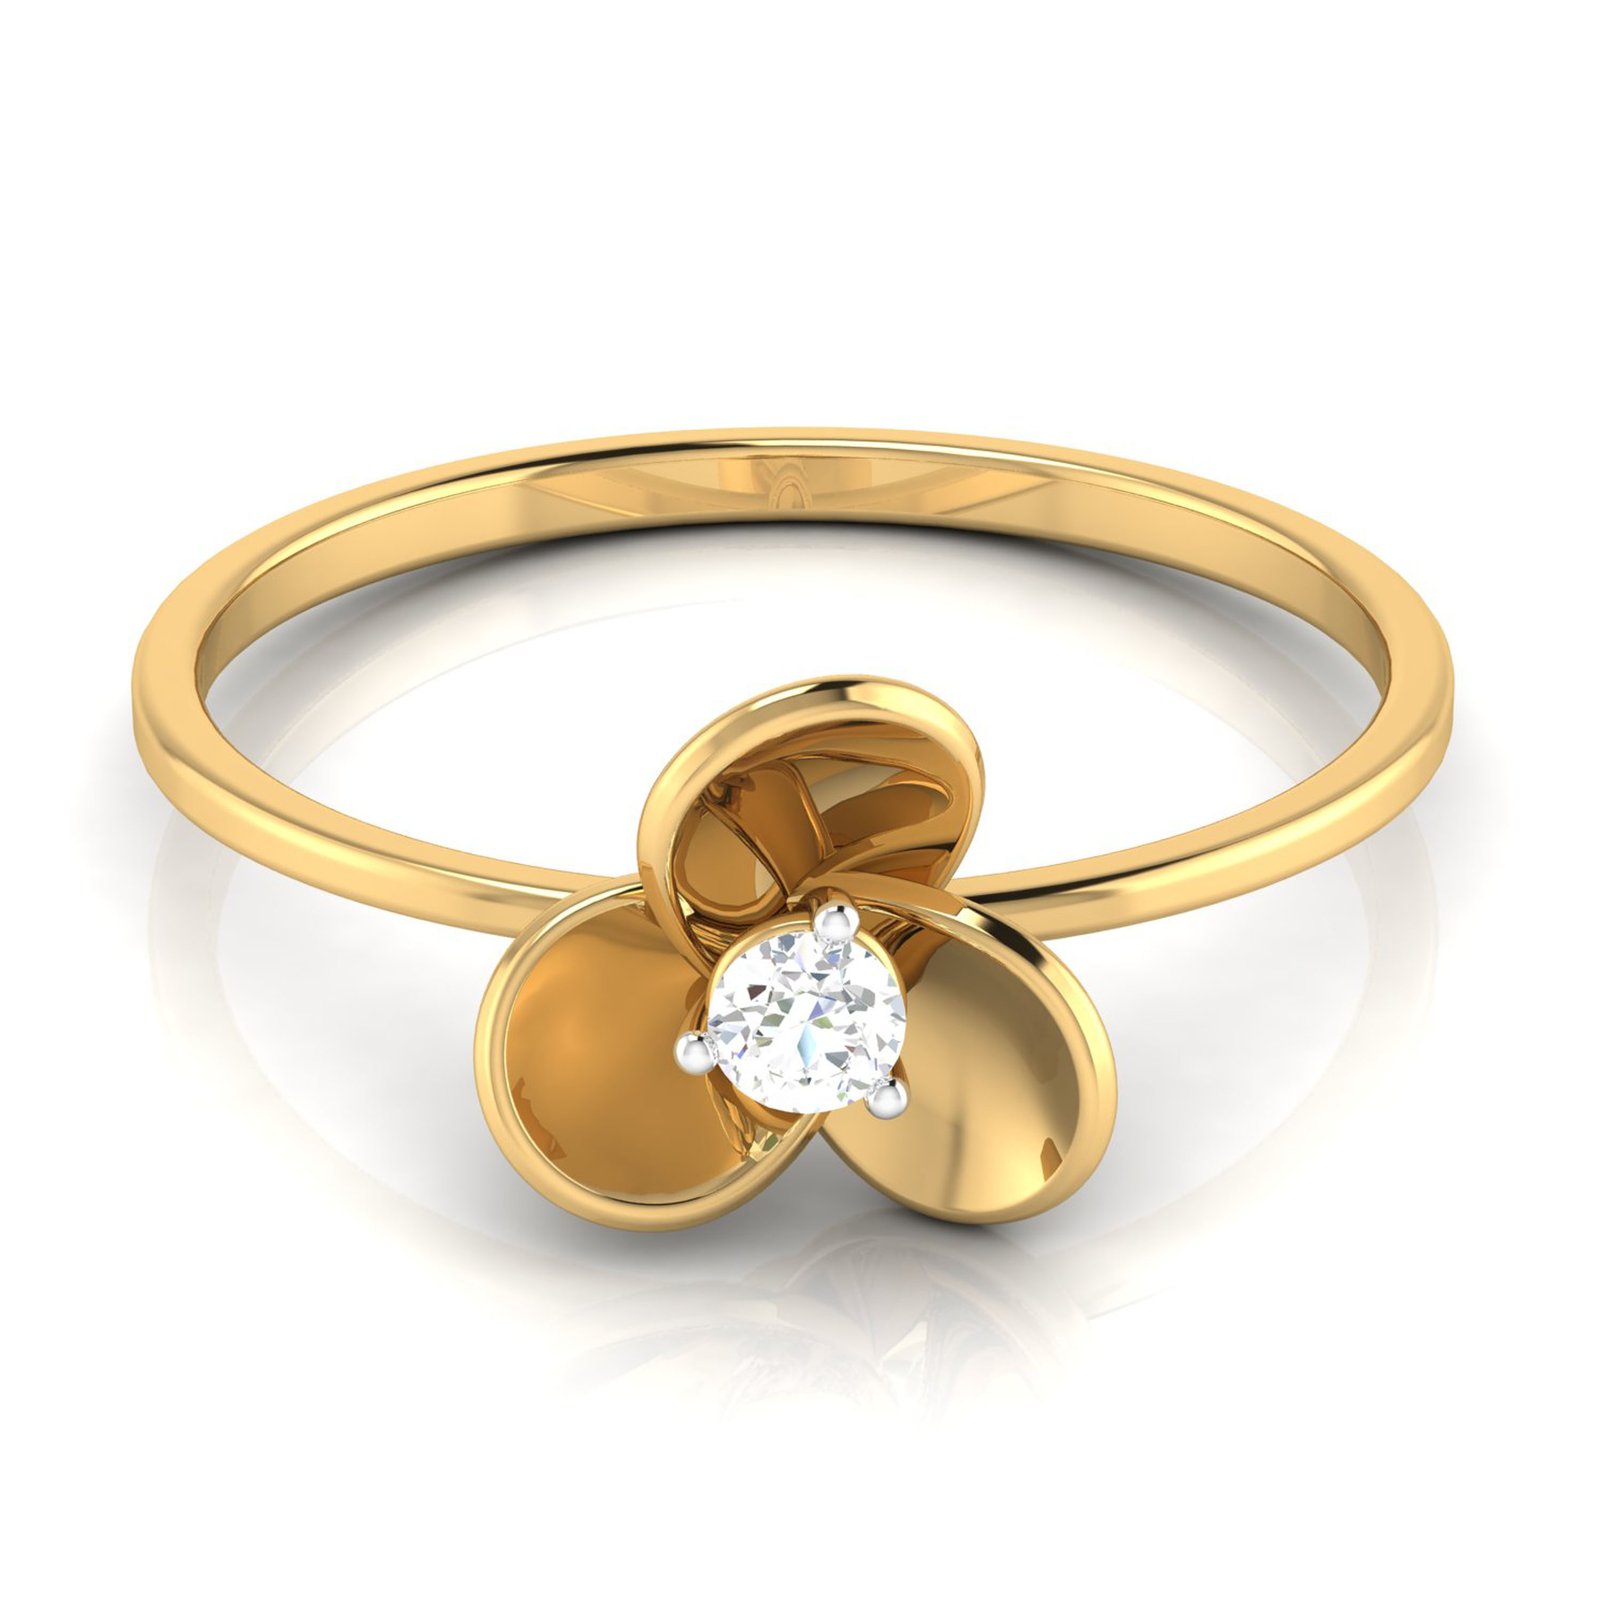 Delightful Gloom Diamond Ring In Pure Gold By Dhanji Jewels